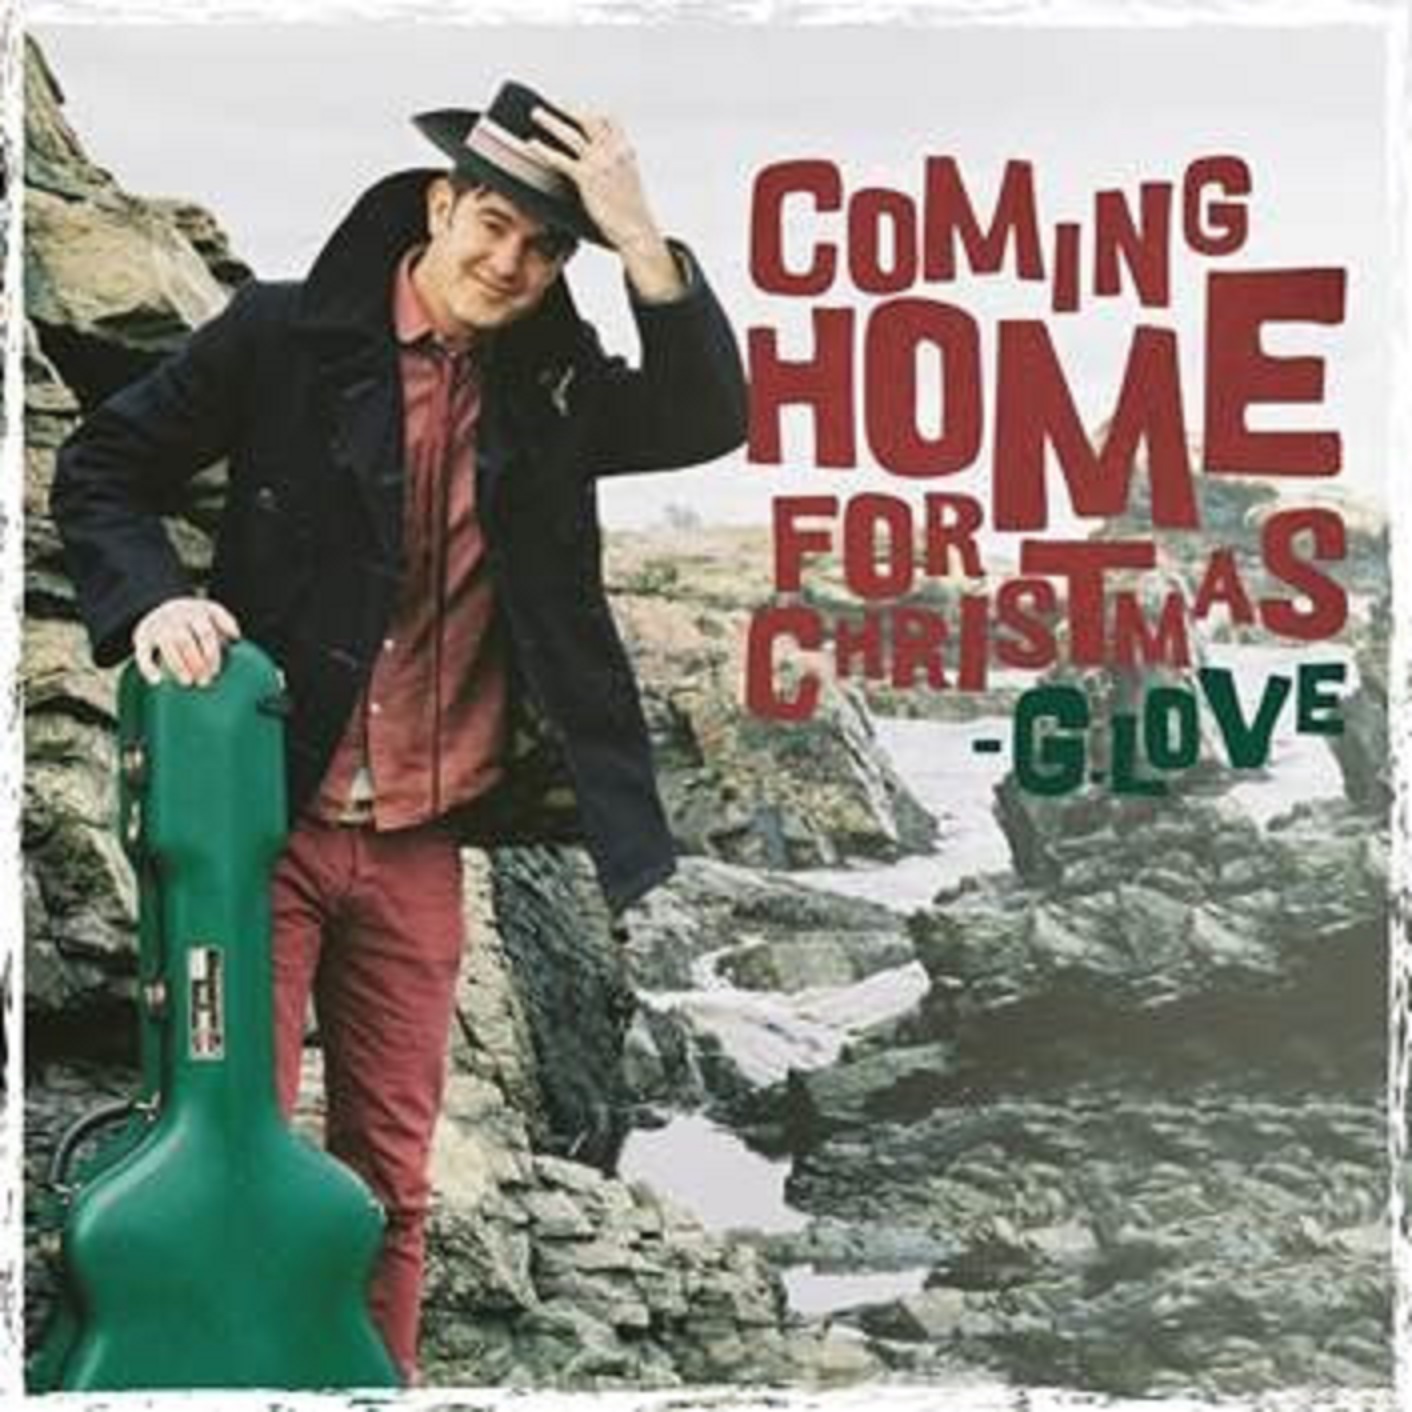 G. Love & the Special Sauce present 'Coming Home For Christmas'. Photo by: G. Love & the Special Sauce